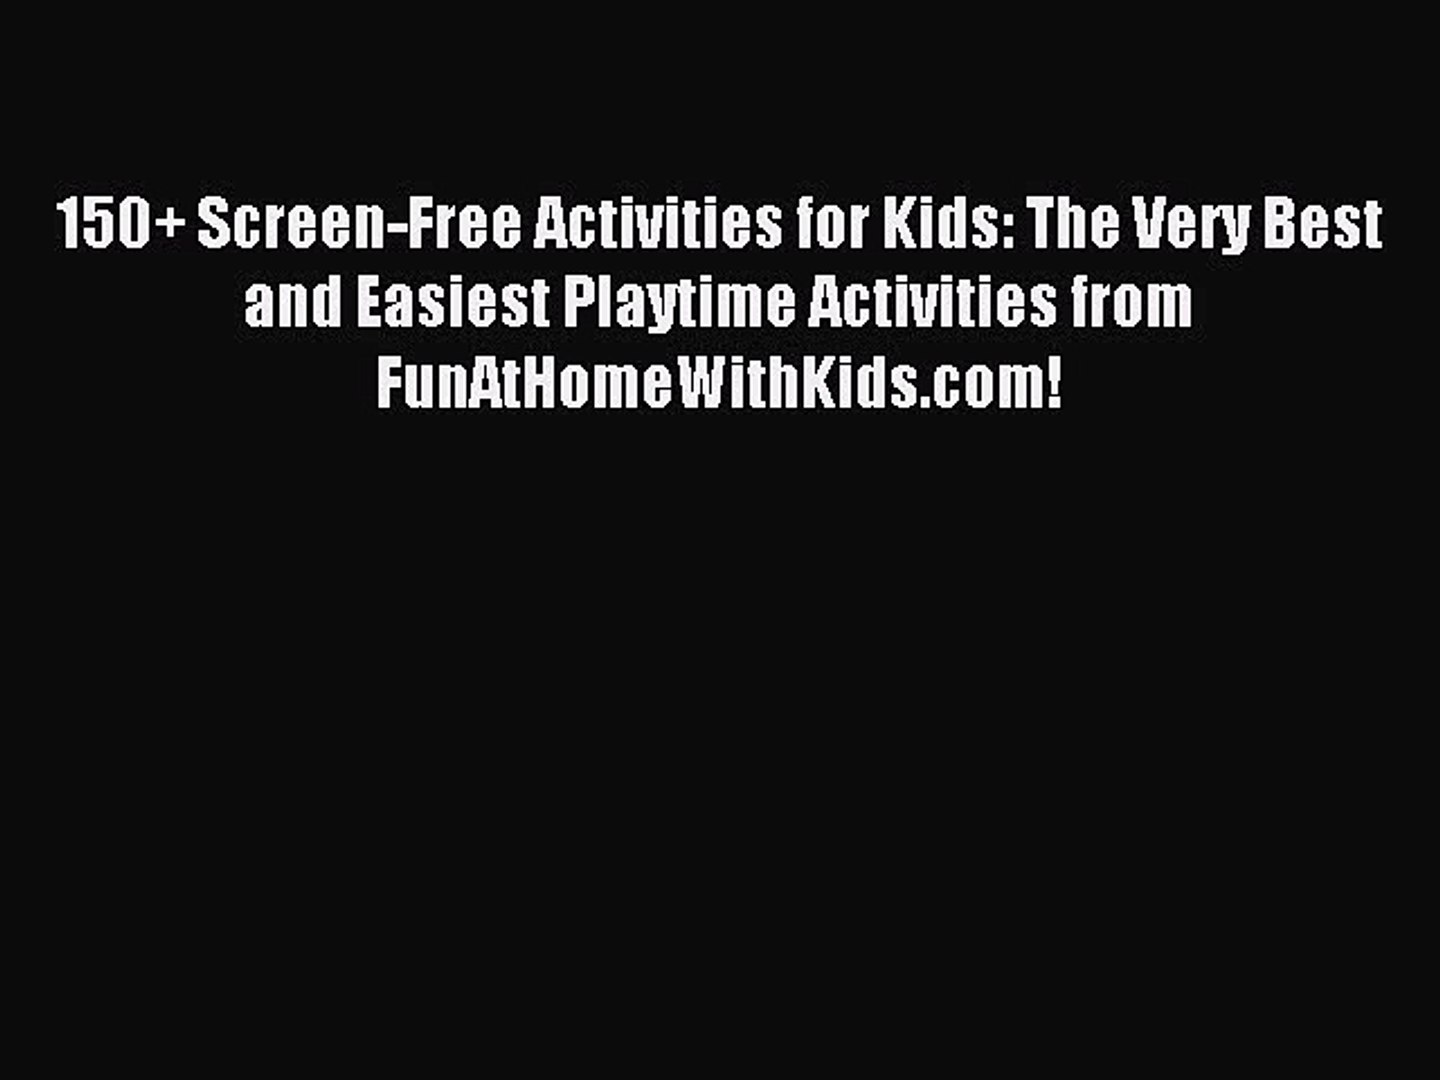 Read 150+ Screen-Free Activities for Kids: The Very Best and Easiest Playtime Activities from